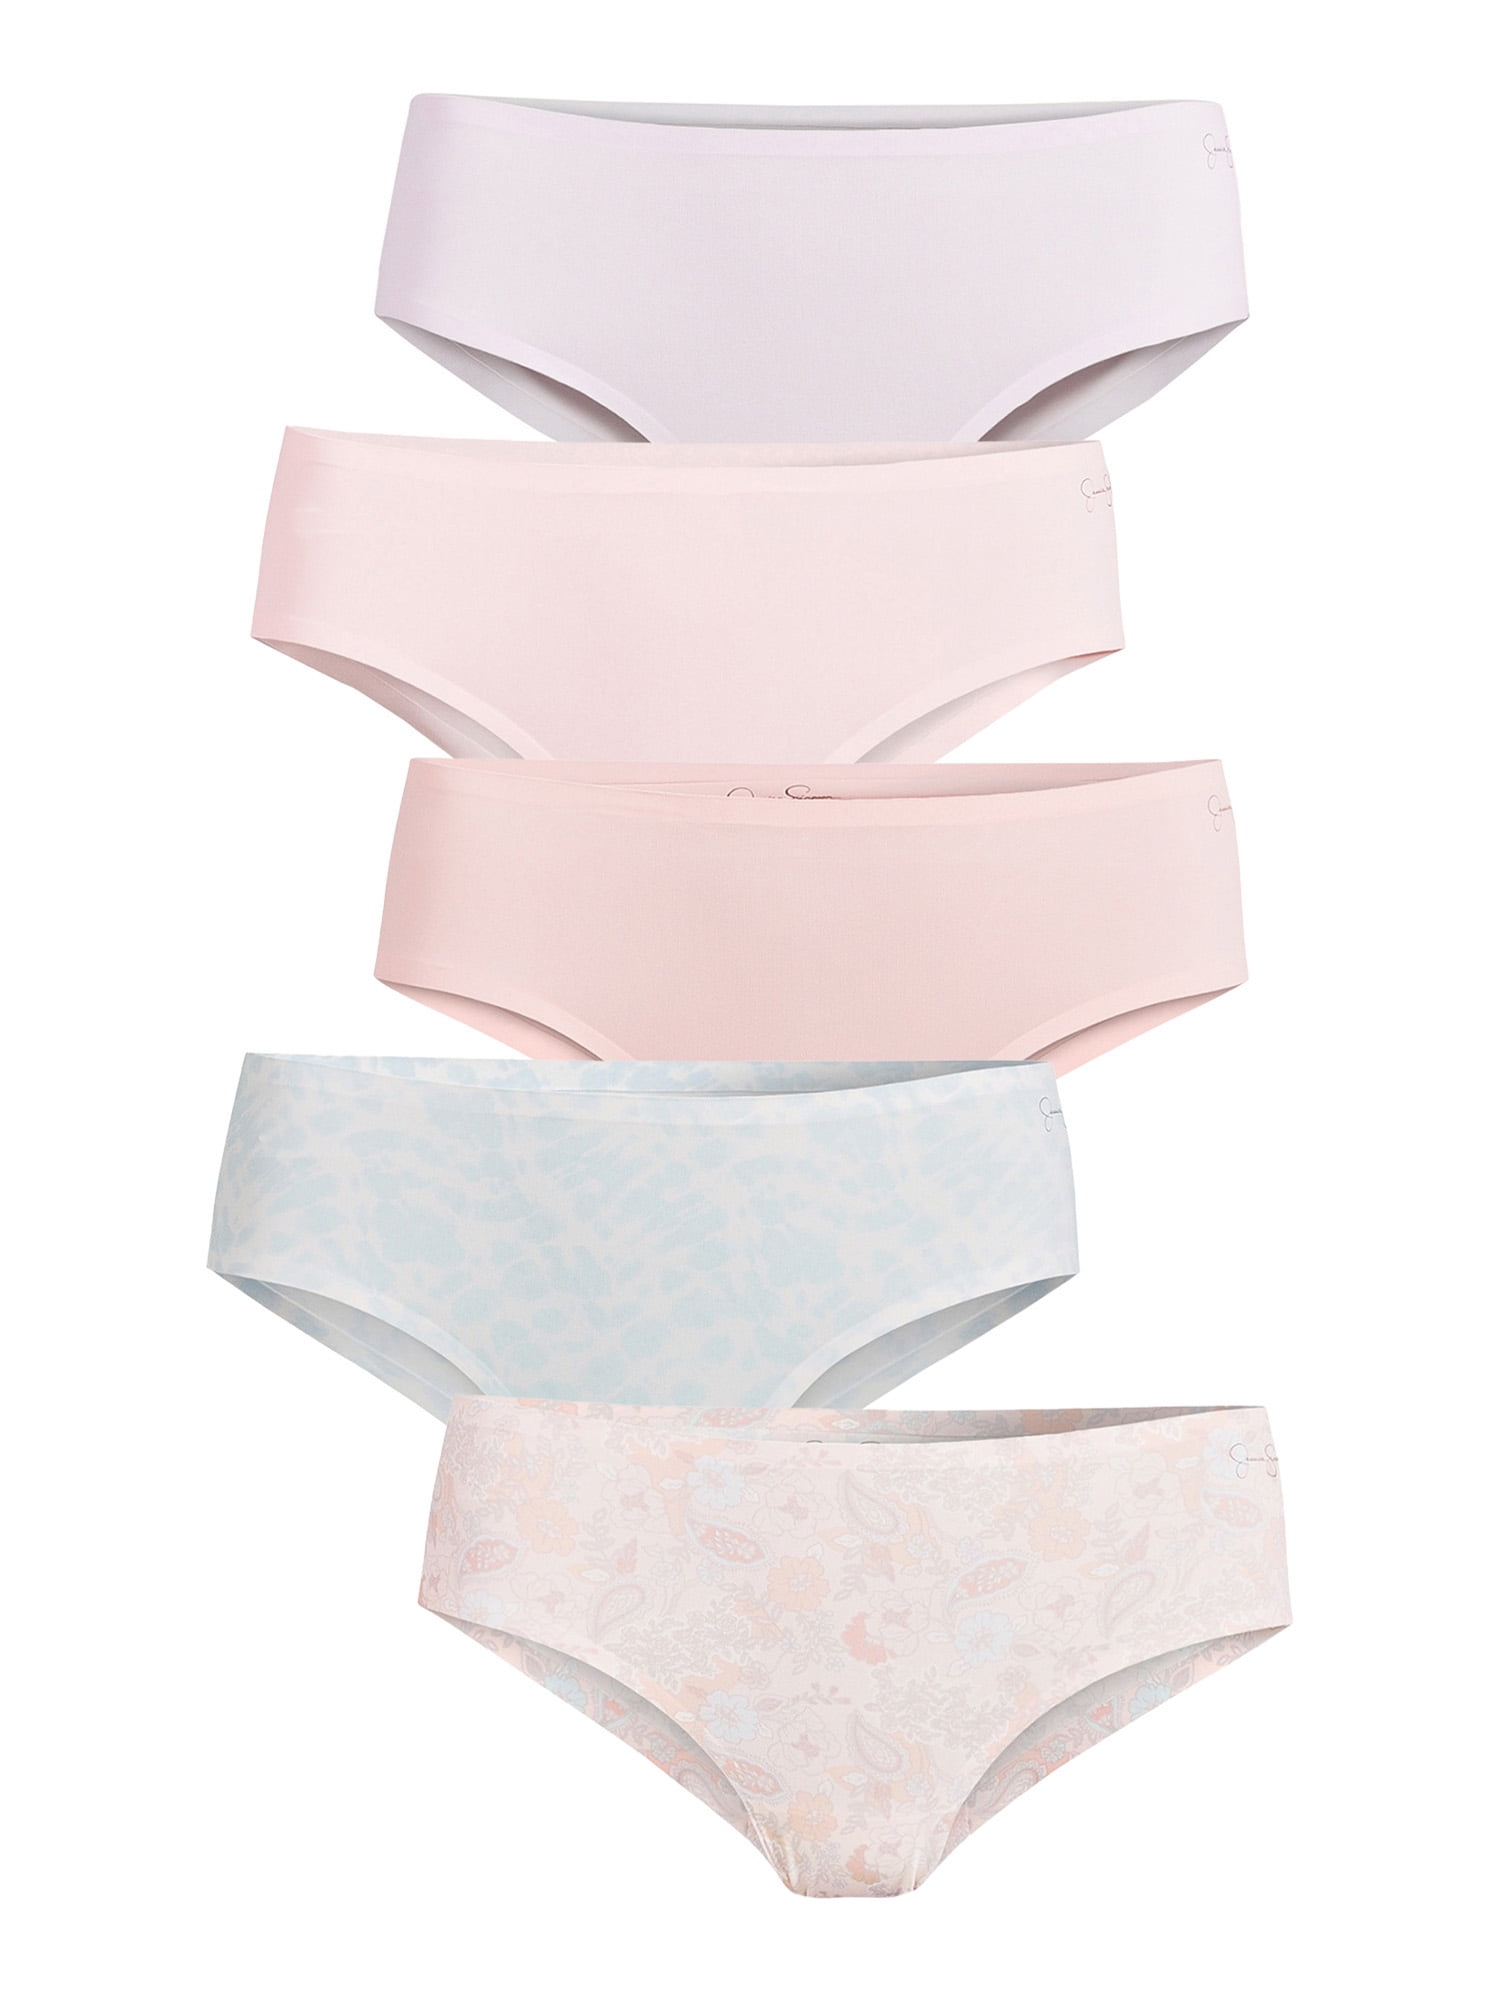 Jessica Simpson Women's Underwear - 10 Pack Seamless Hipster Briefs (S-XL),  Size Small, Black/Gardenia/Pearl Blush/Black/Textured Animal Pearl Blush at   Women's Clothing store